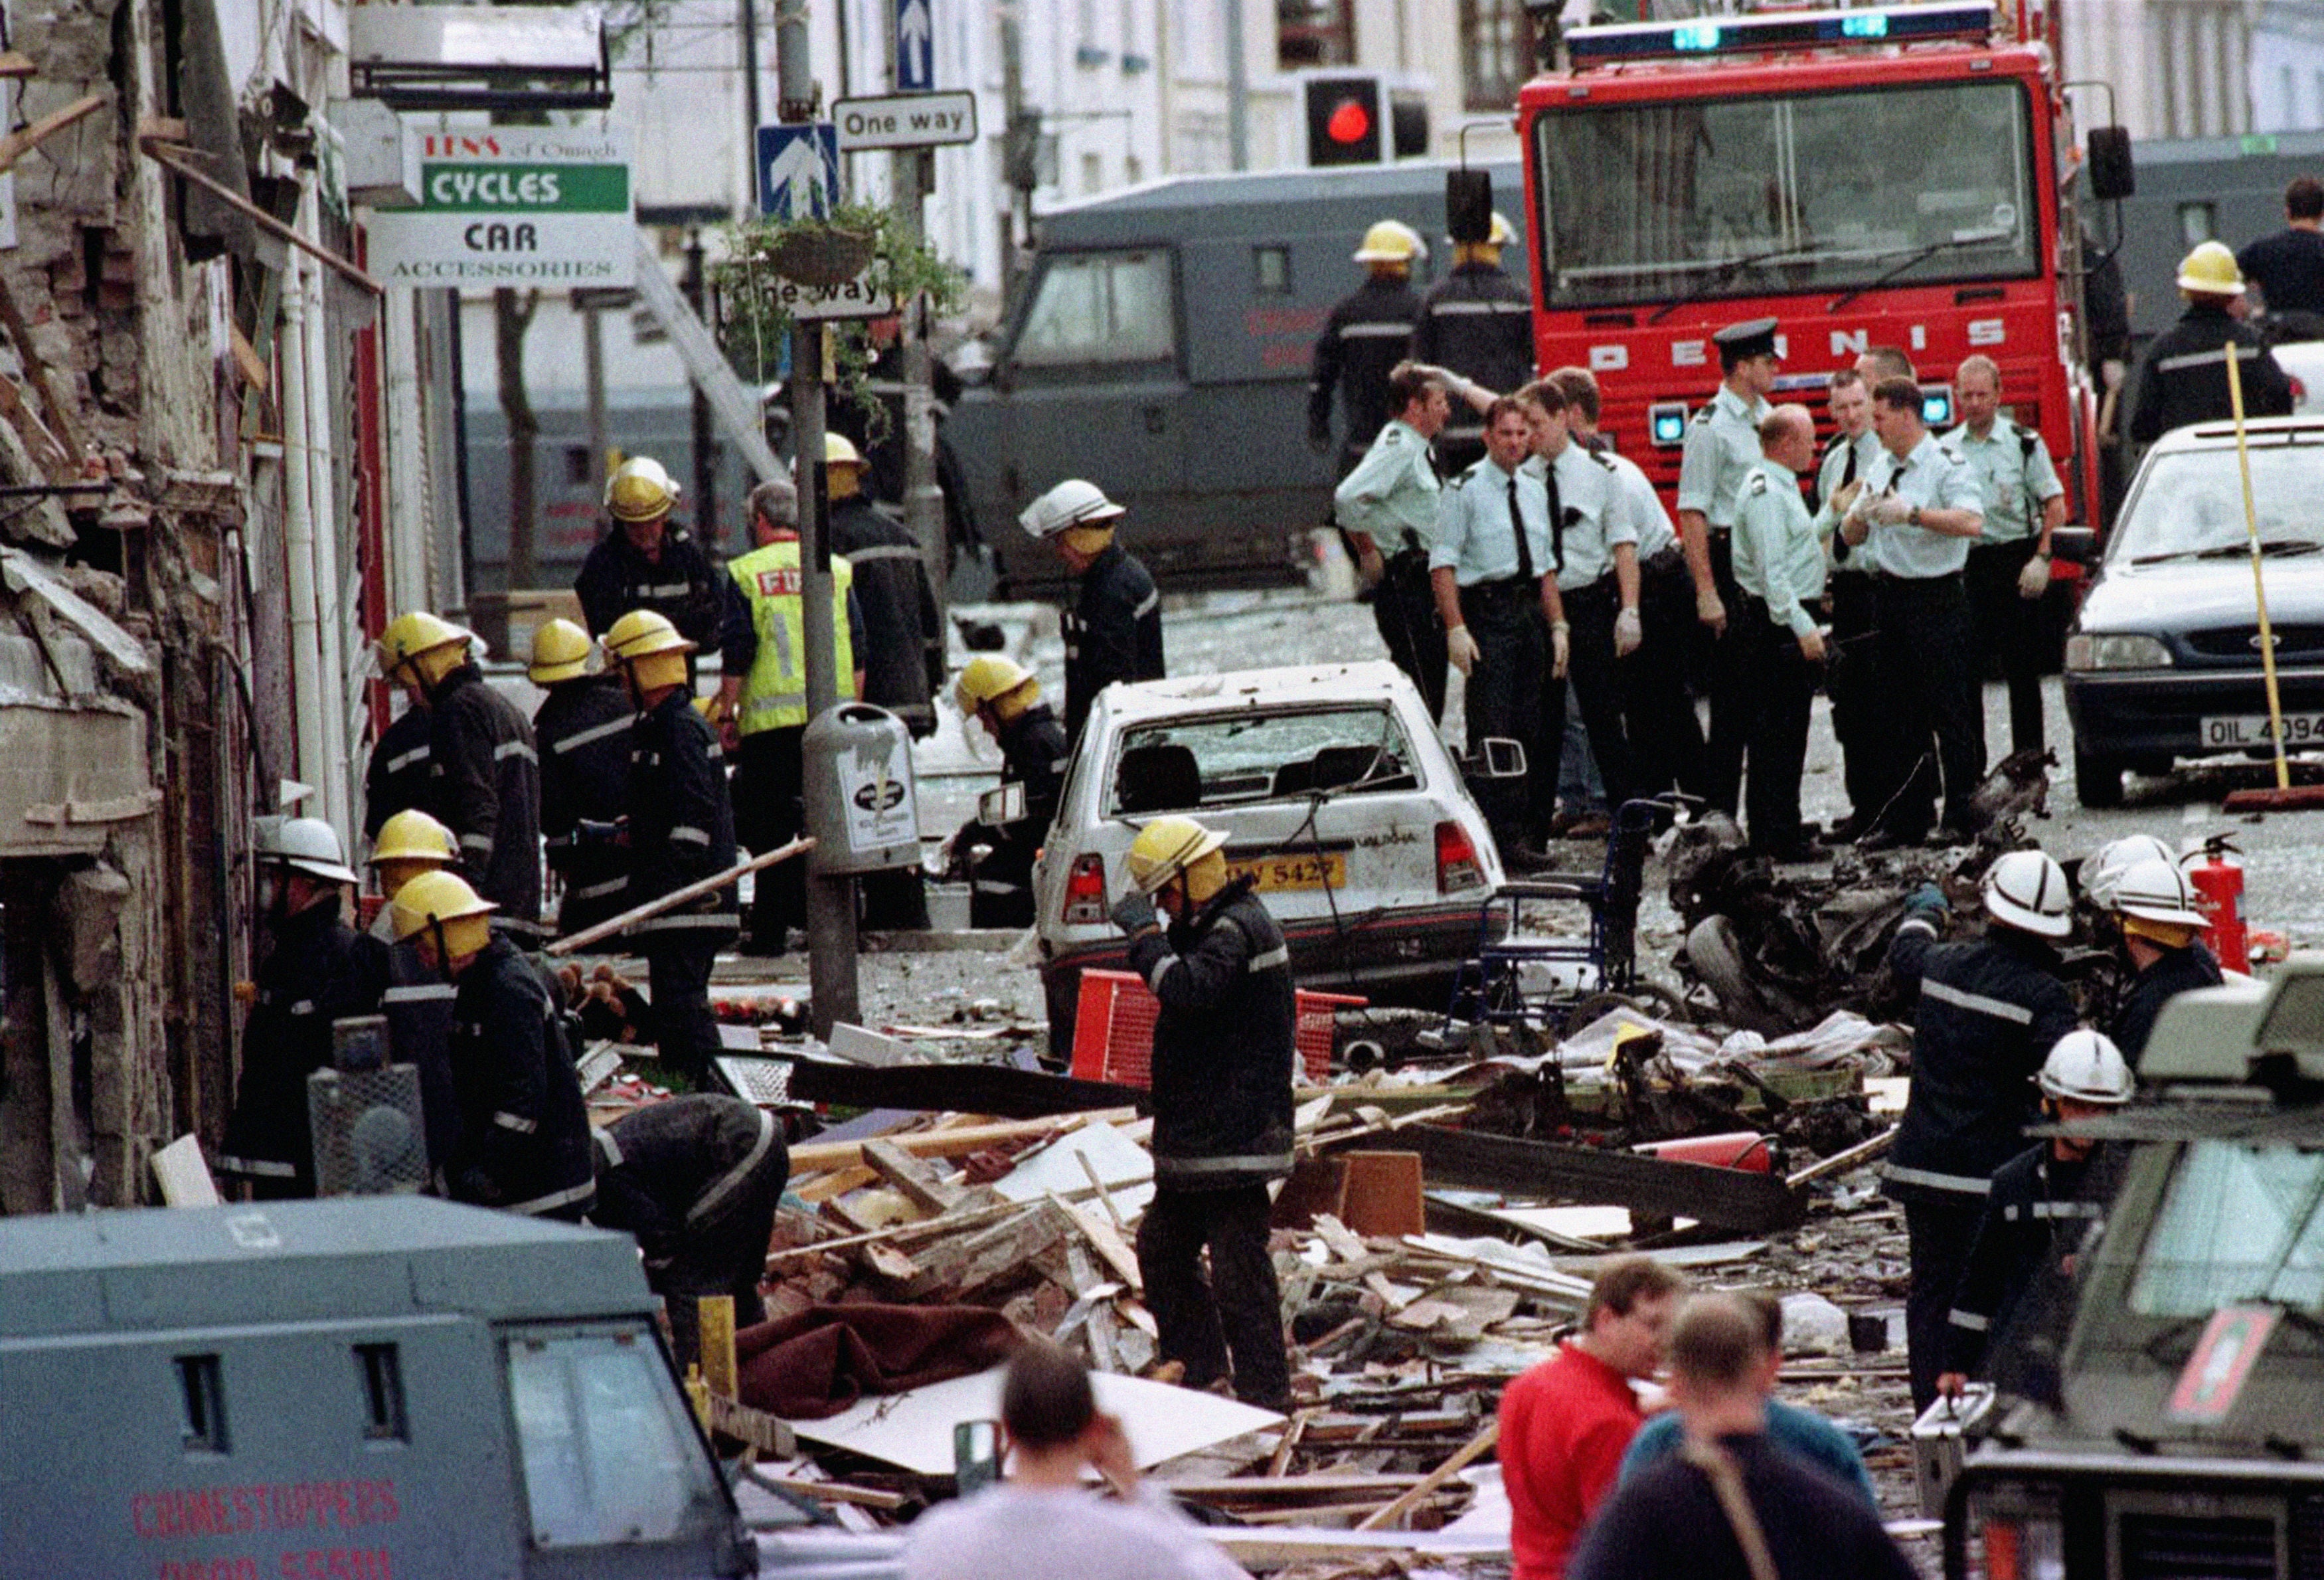 The bombing in August 1998 killed 29 people